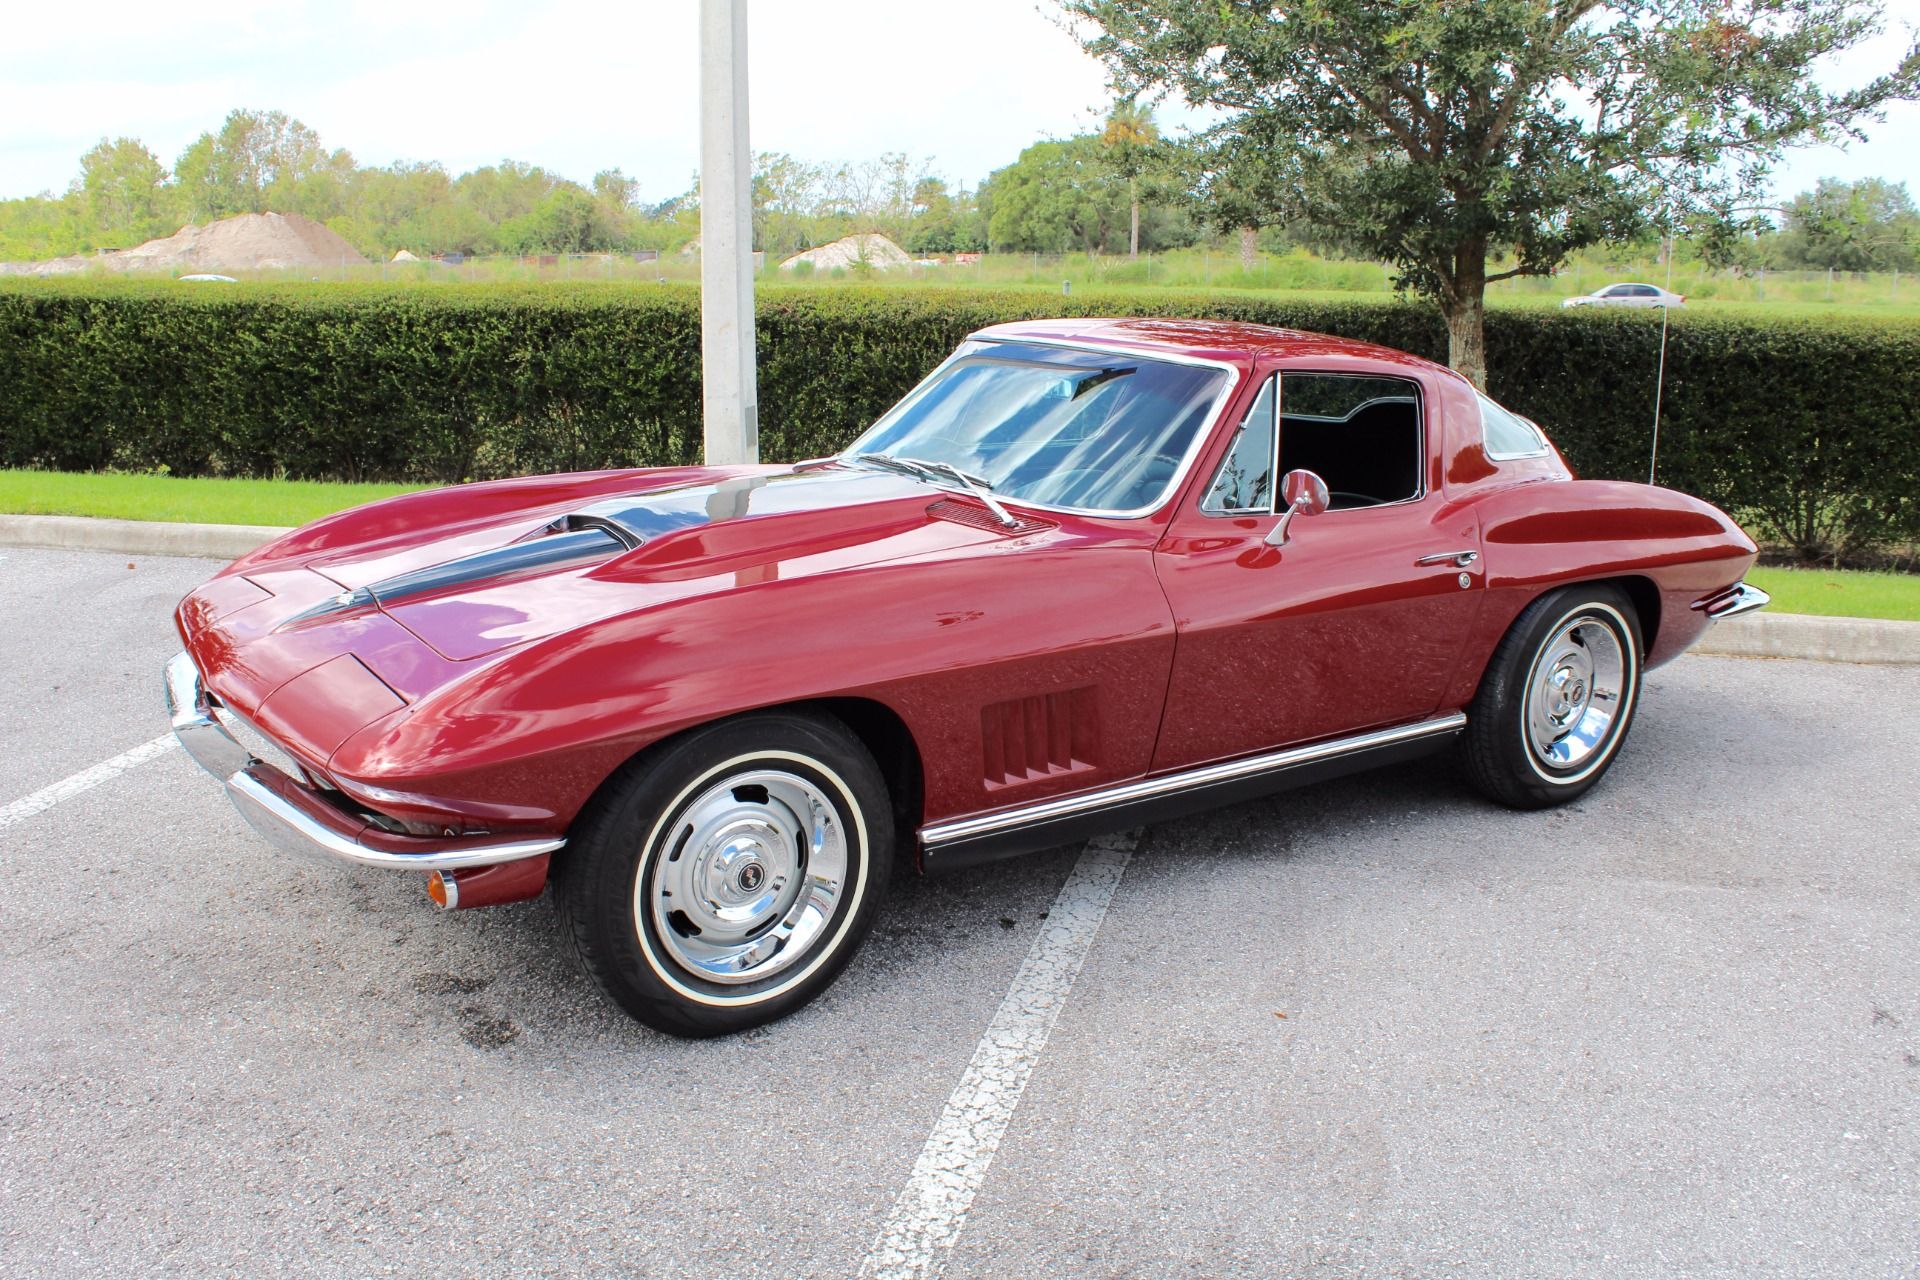 Here's What The 1967 Chevrolet Corvette Stingray Costs Today